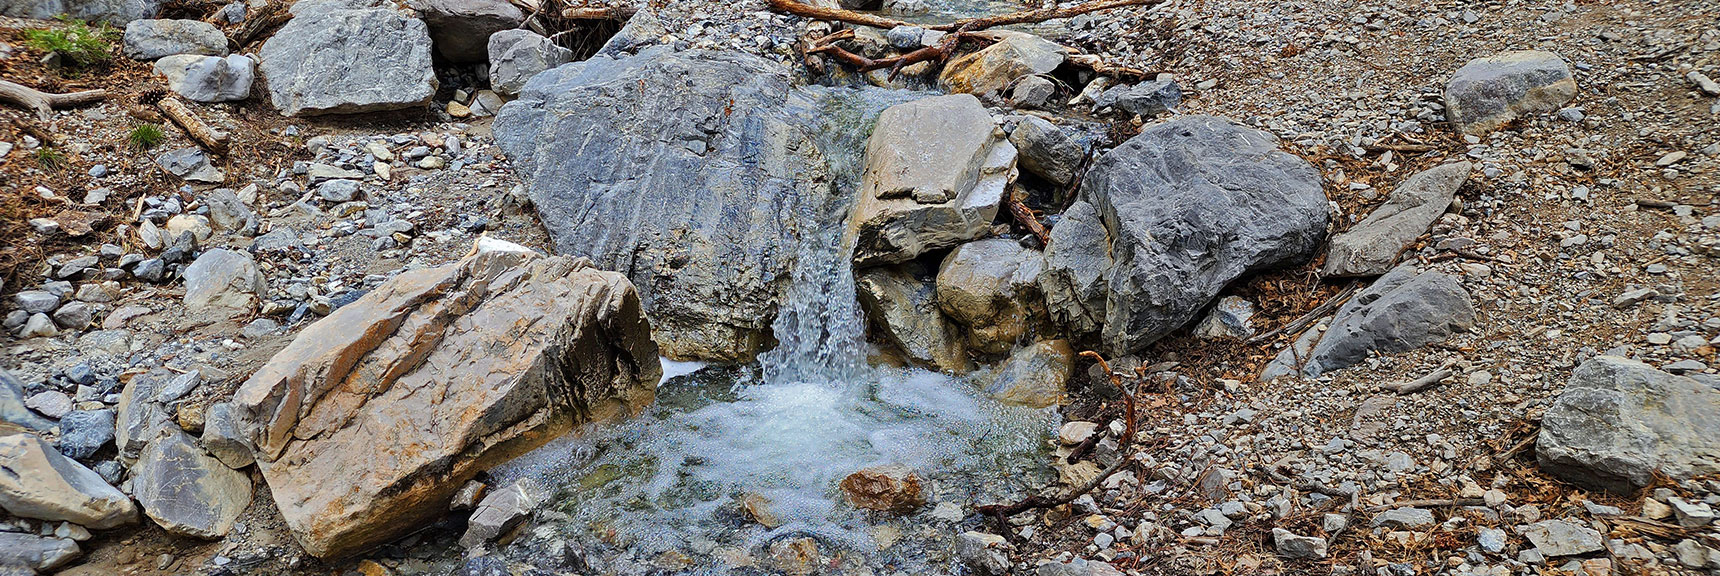 Water Flowing at its Highest Early May After Deep Snowy Winter | Fletcher Canyon Trail | Mt Charleston Wilderness | Spring Mountains, Nevada